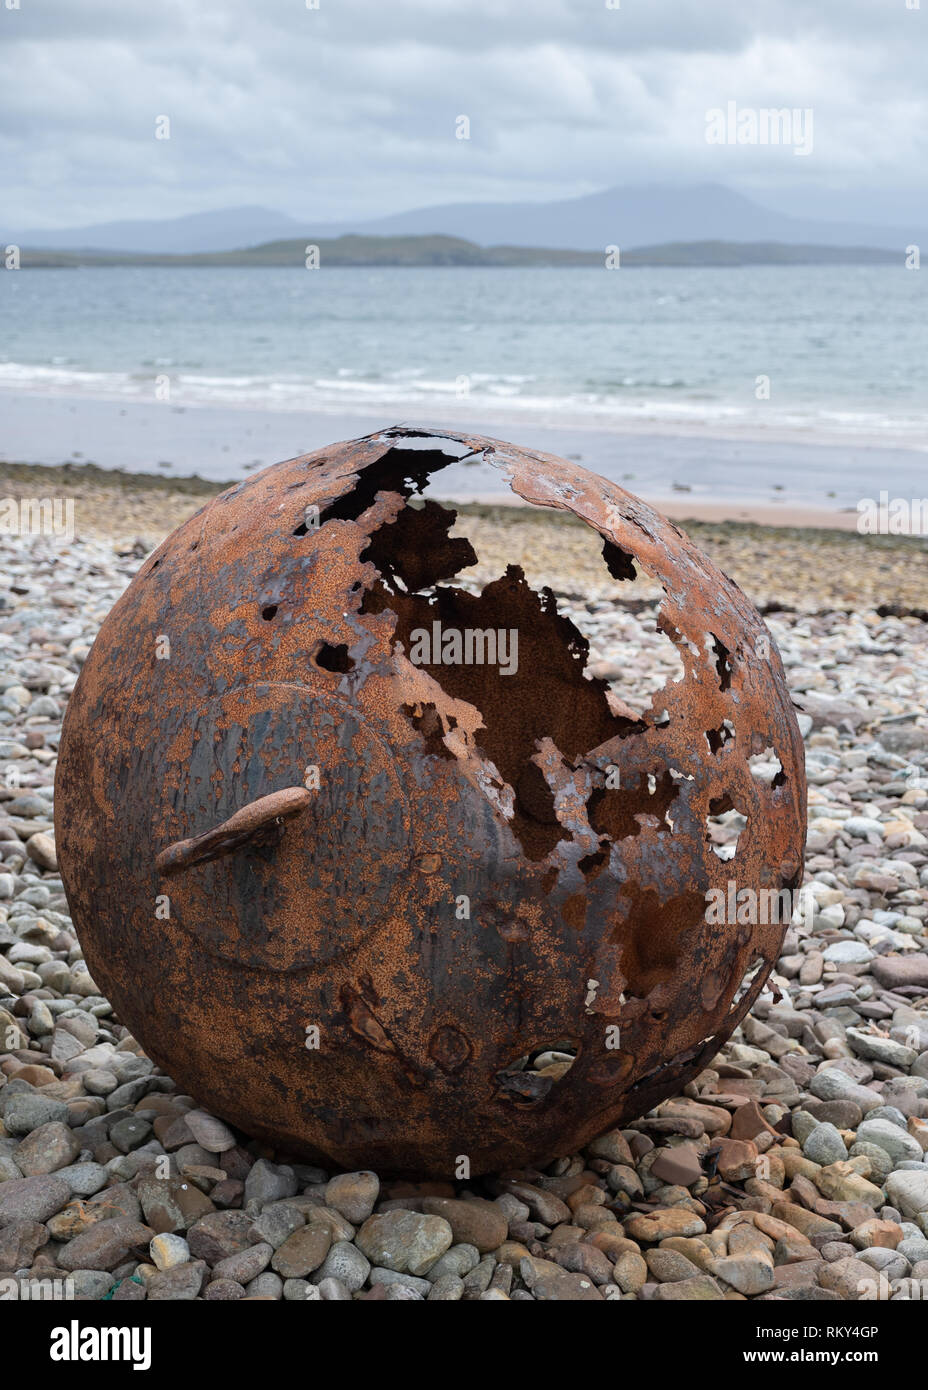 An Old And Rusty Buoy Stranded On A Pebble Beach Near The Shoreline On